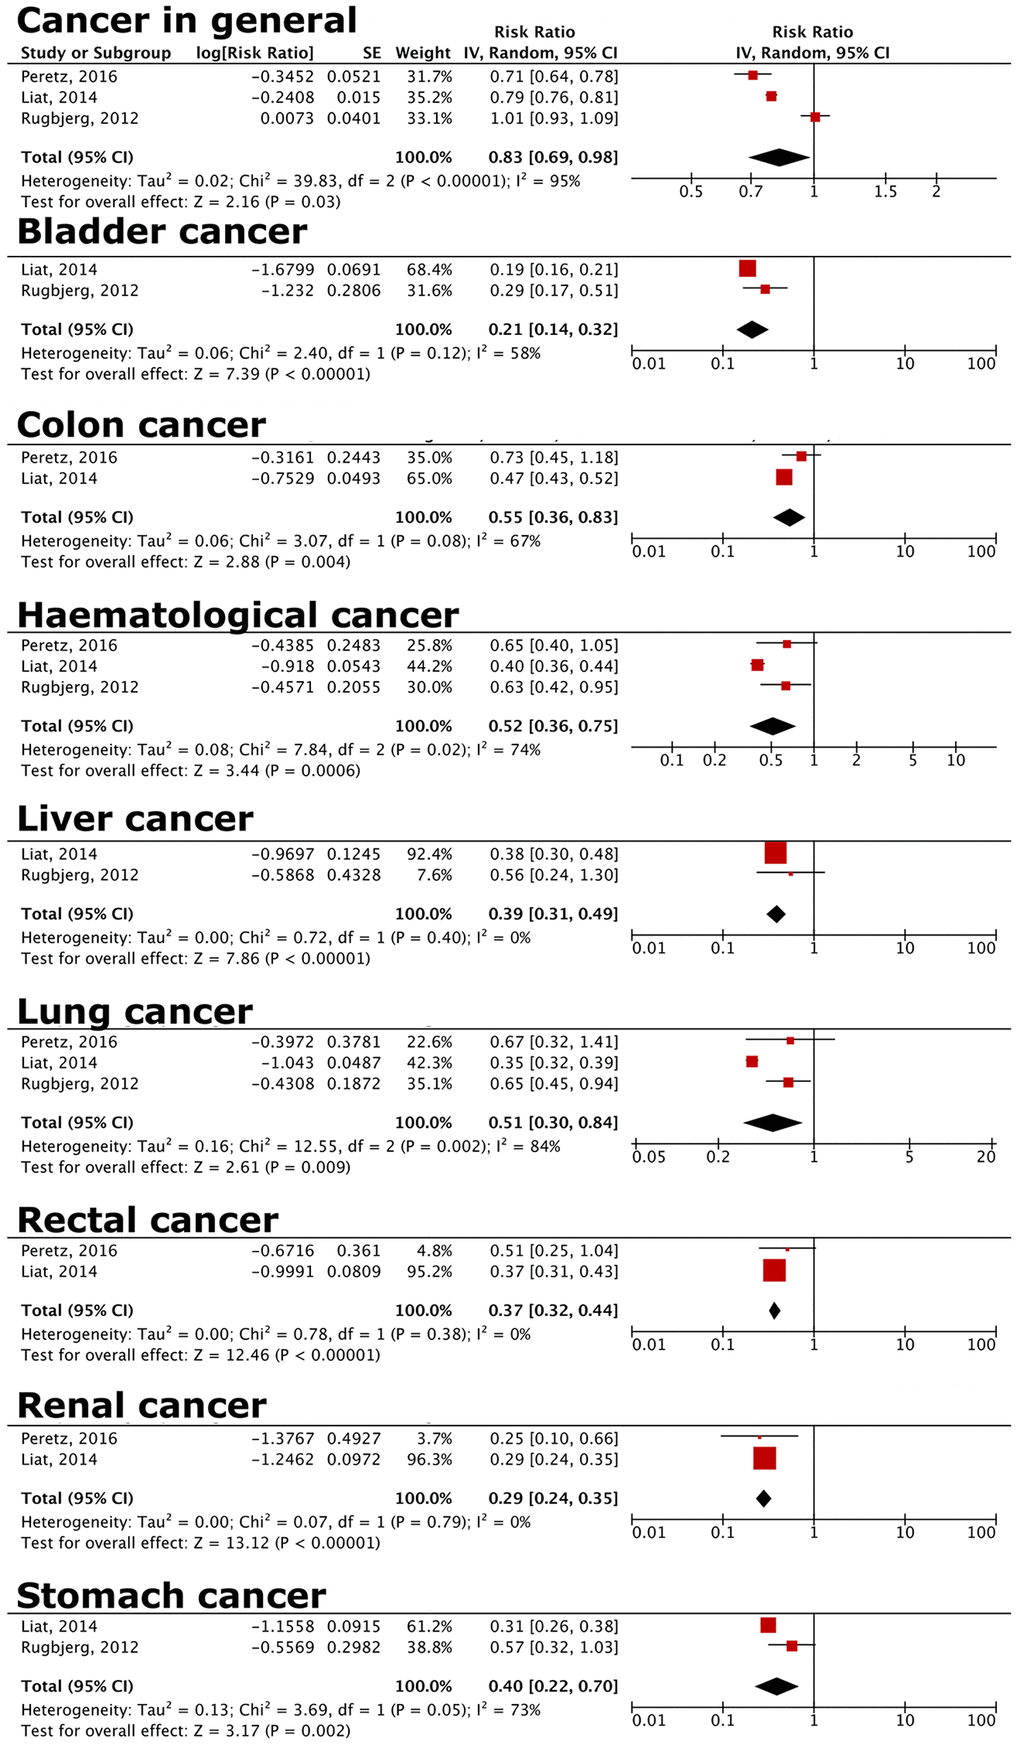 Forest plot comparing risks of cancer in general and specific cancers for female vs. male PD patients. Female PD patients have decreased risks of overall cancer, and bladder, colon, haematological, liver, lung, and rectal cancer compared to male PD patients. Details of specific cancers included in each cancer group are listed in Supplementary Table 6A–6C.